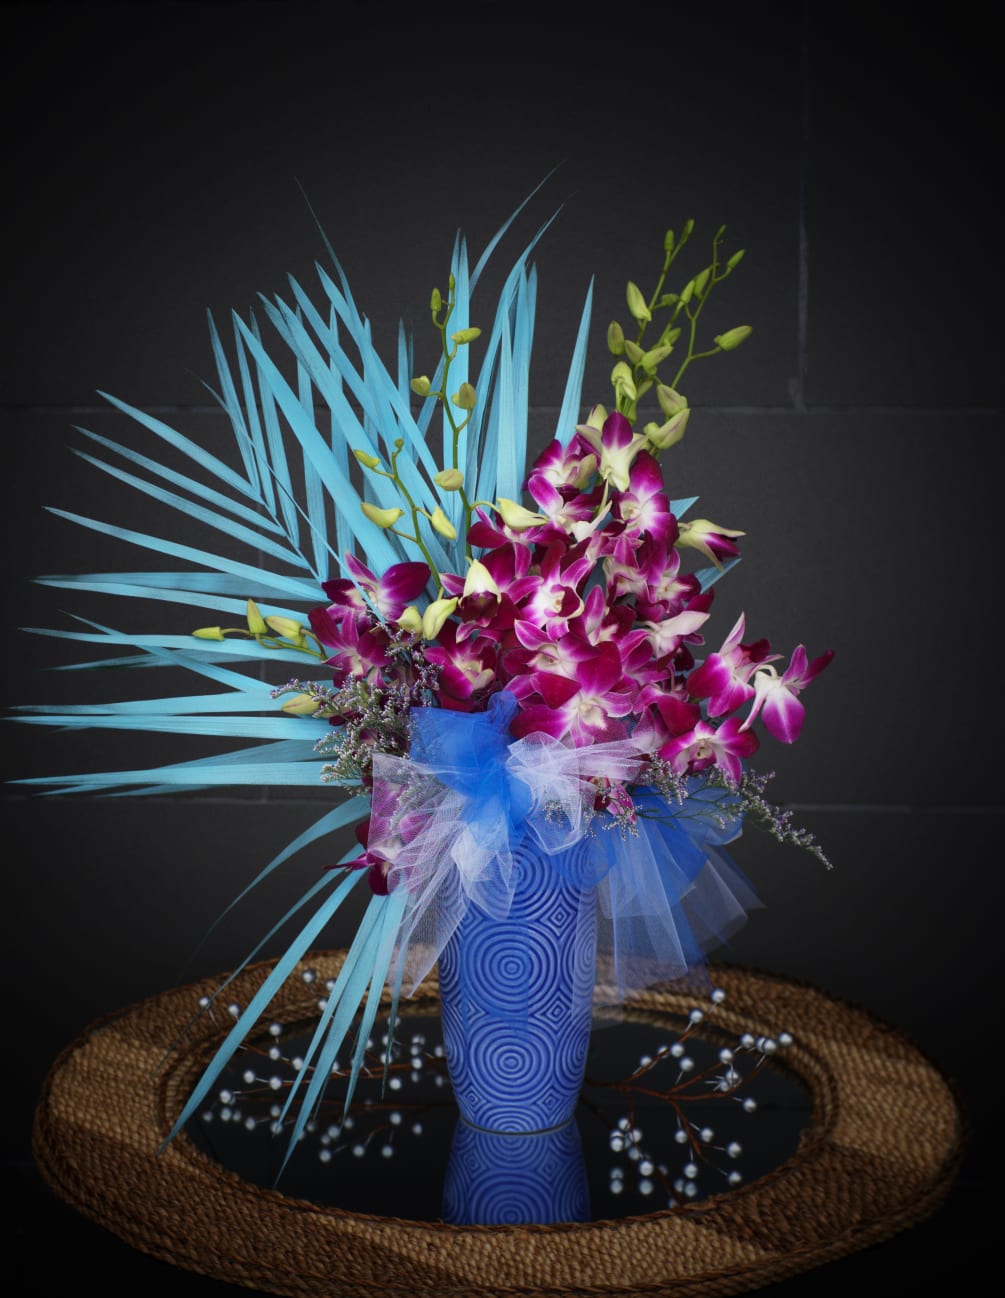 Ocean Breeze design including orchids and palm leaves in a nice vase.